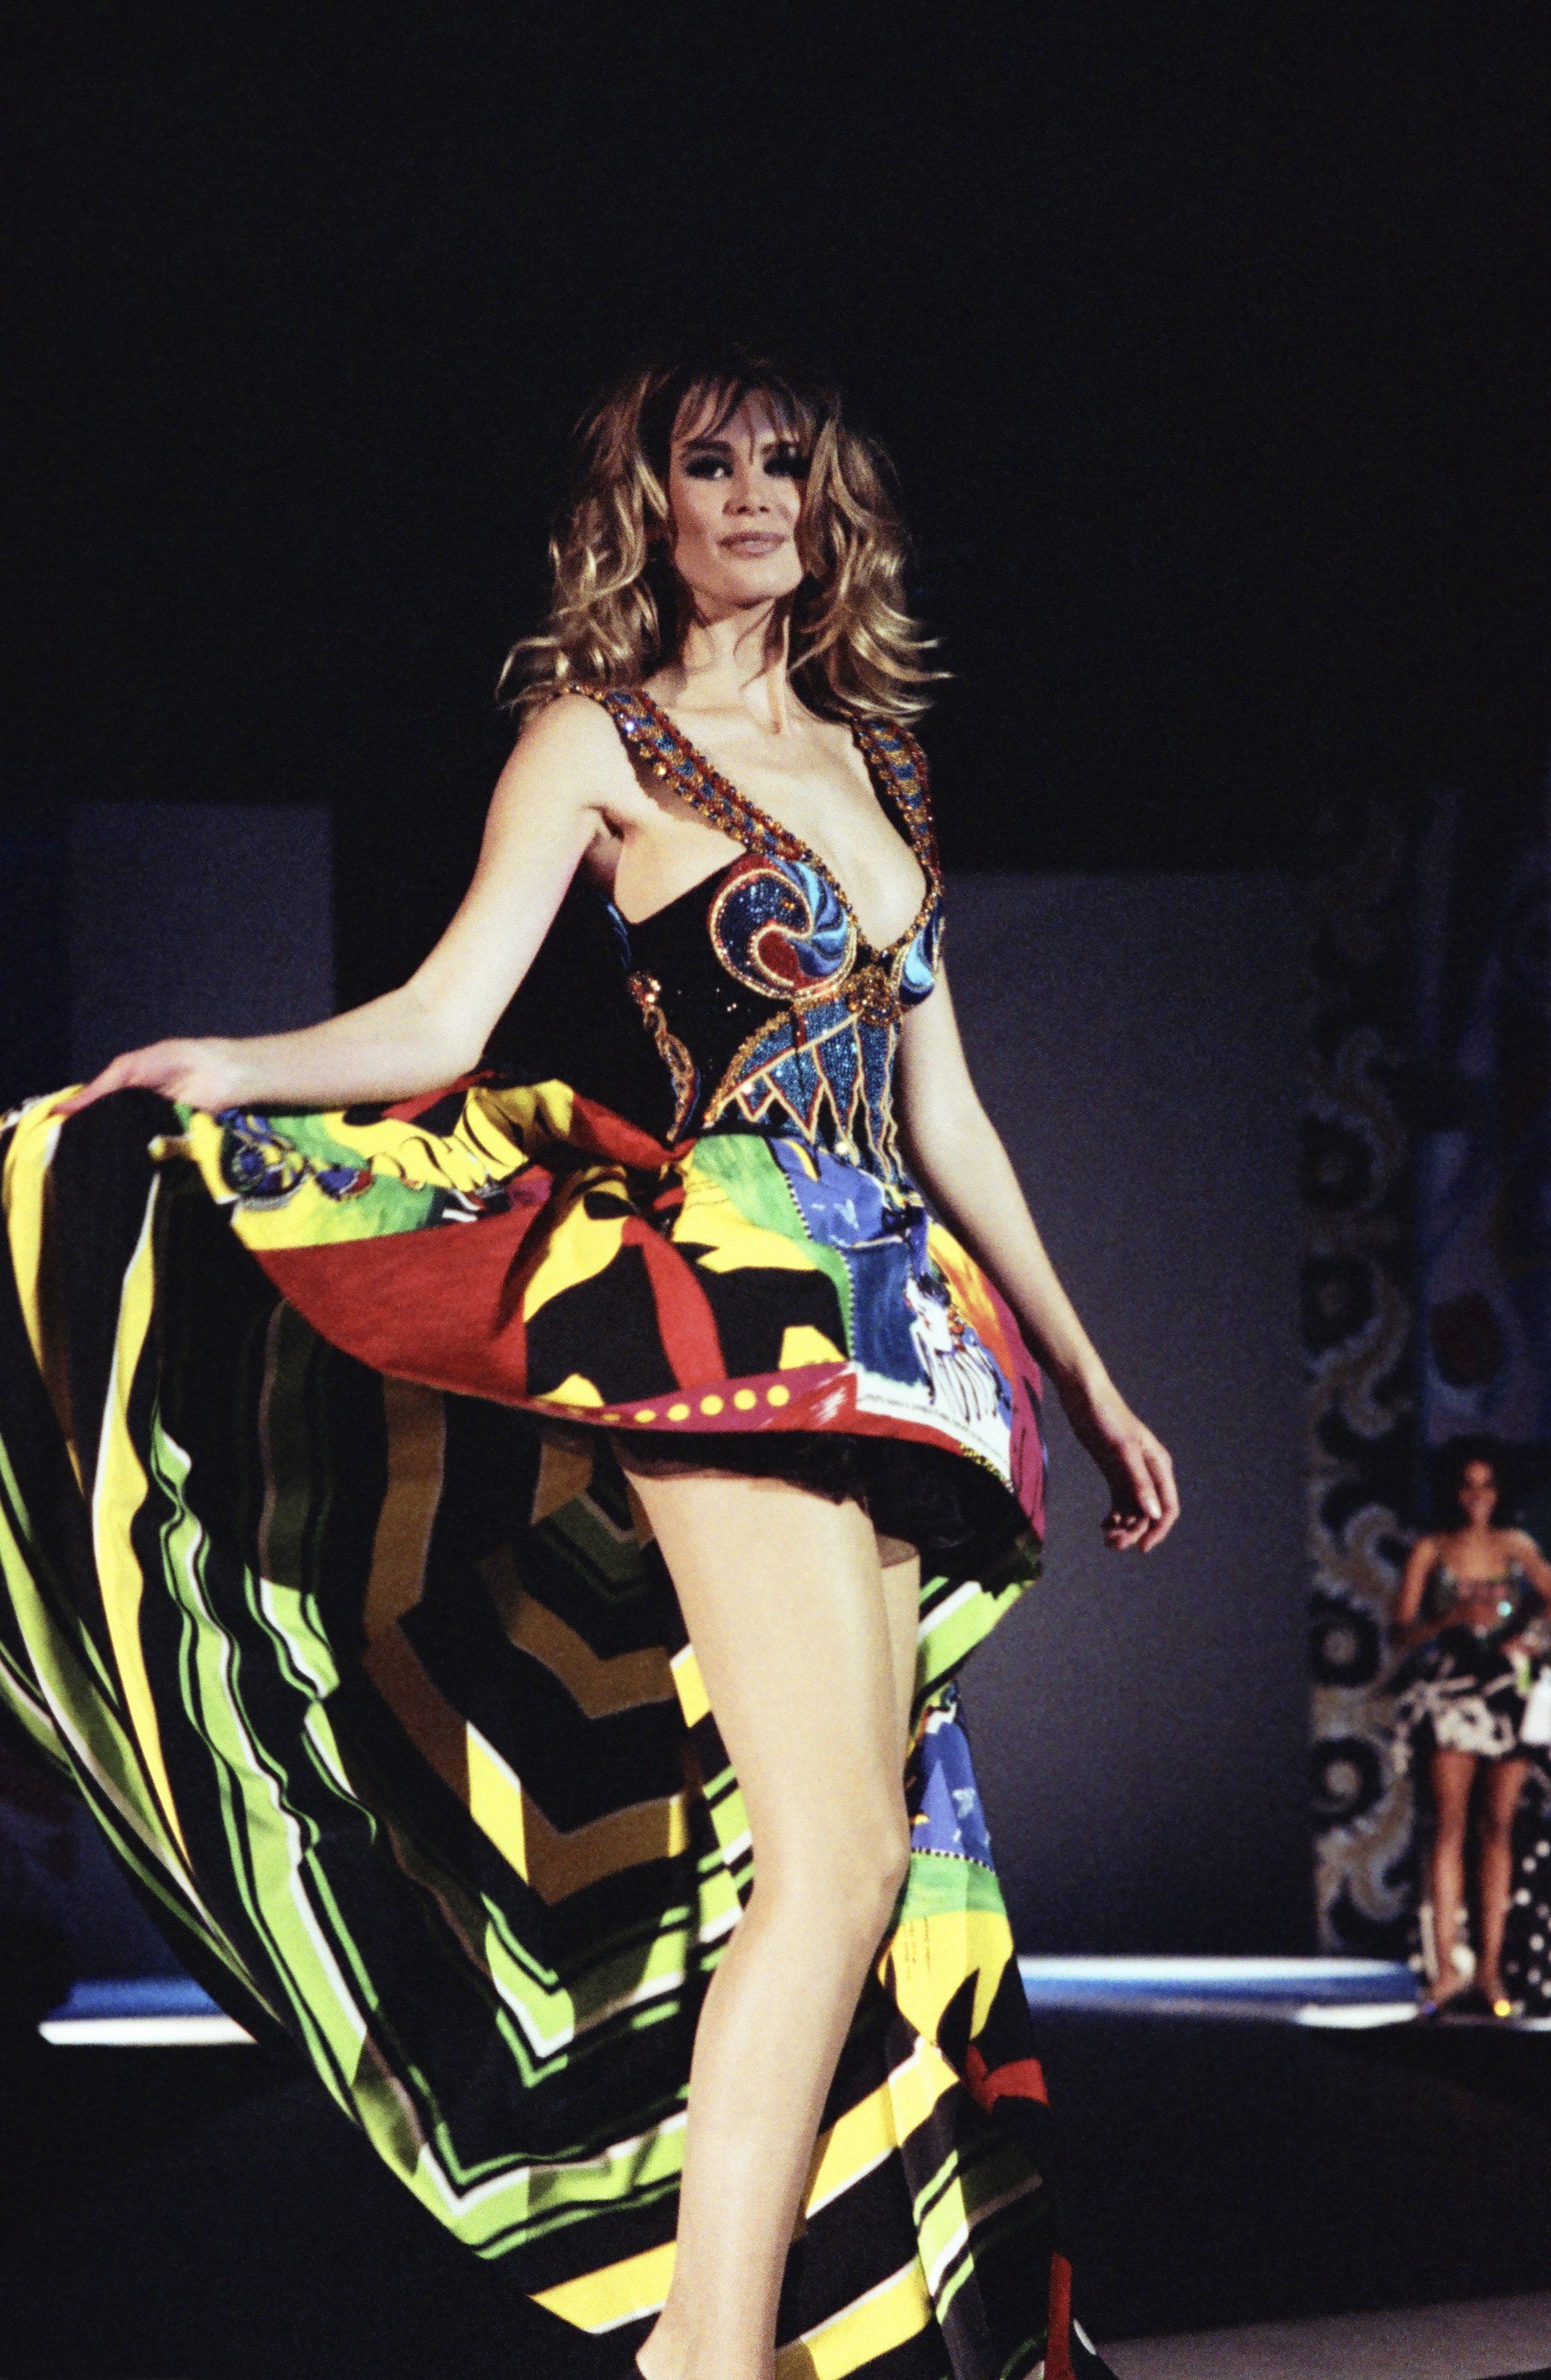 gianni versace was one of the most successful fashion designers in the 1980s and 1990s